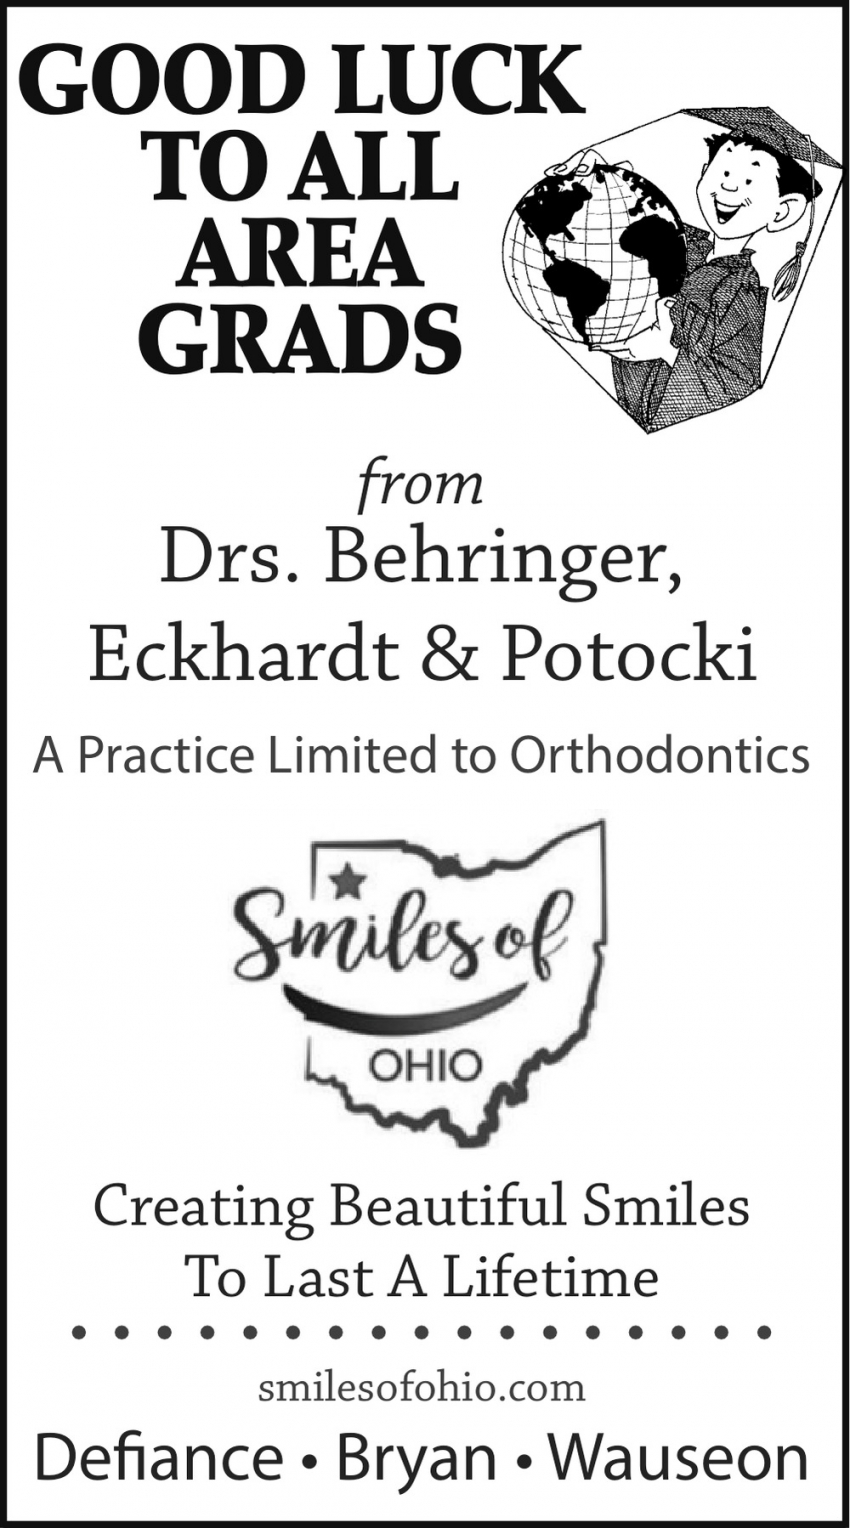 A Practice Limited To Orthodontics